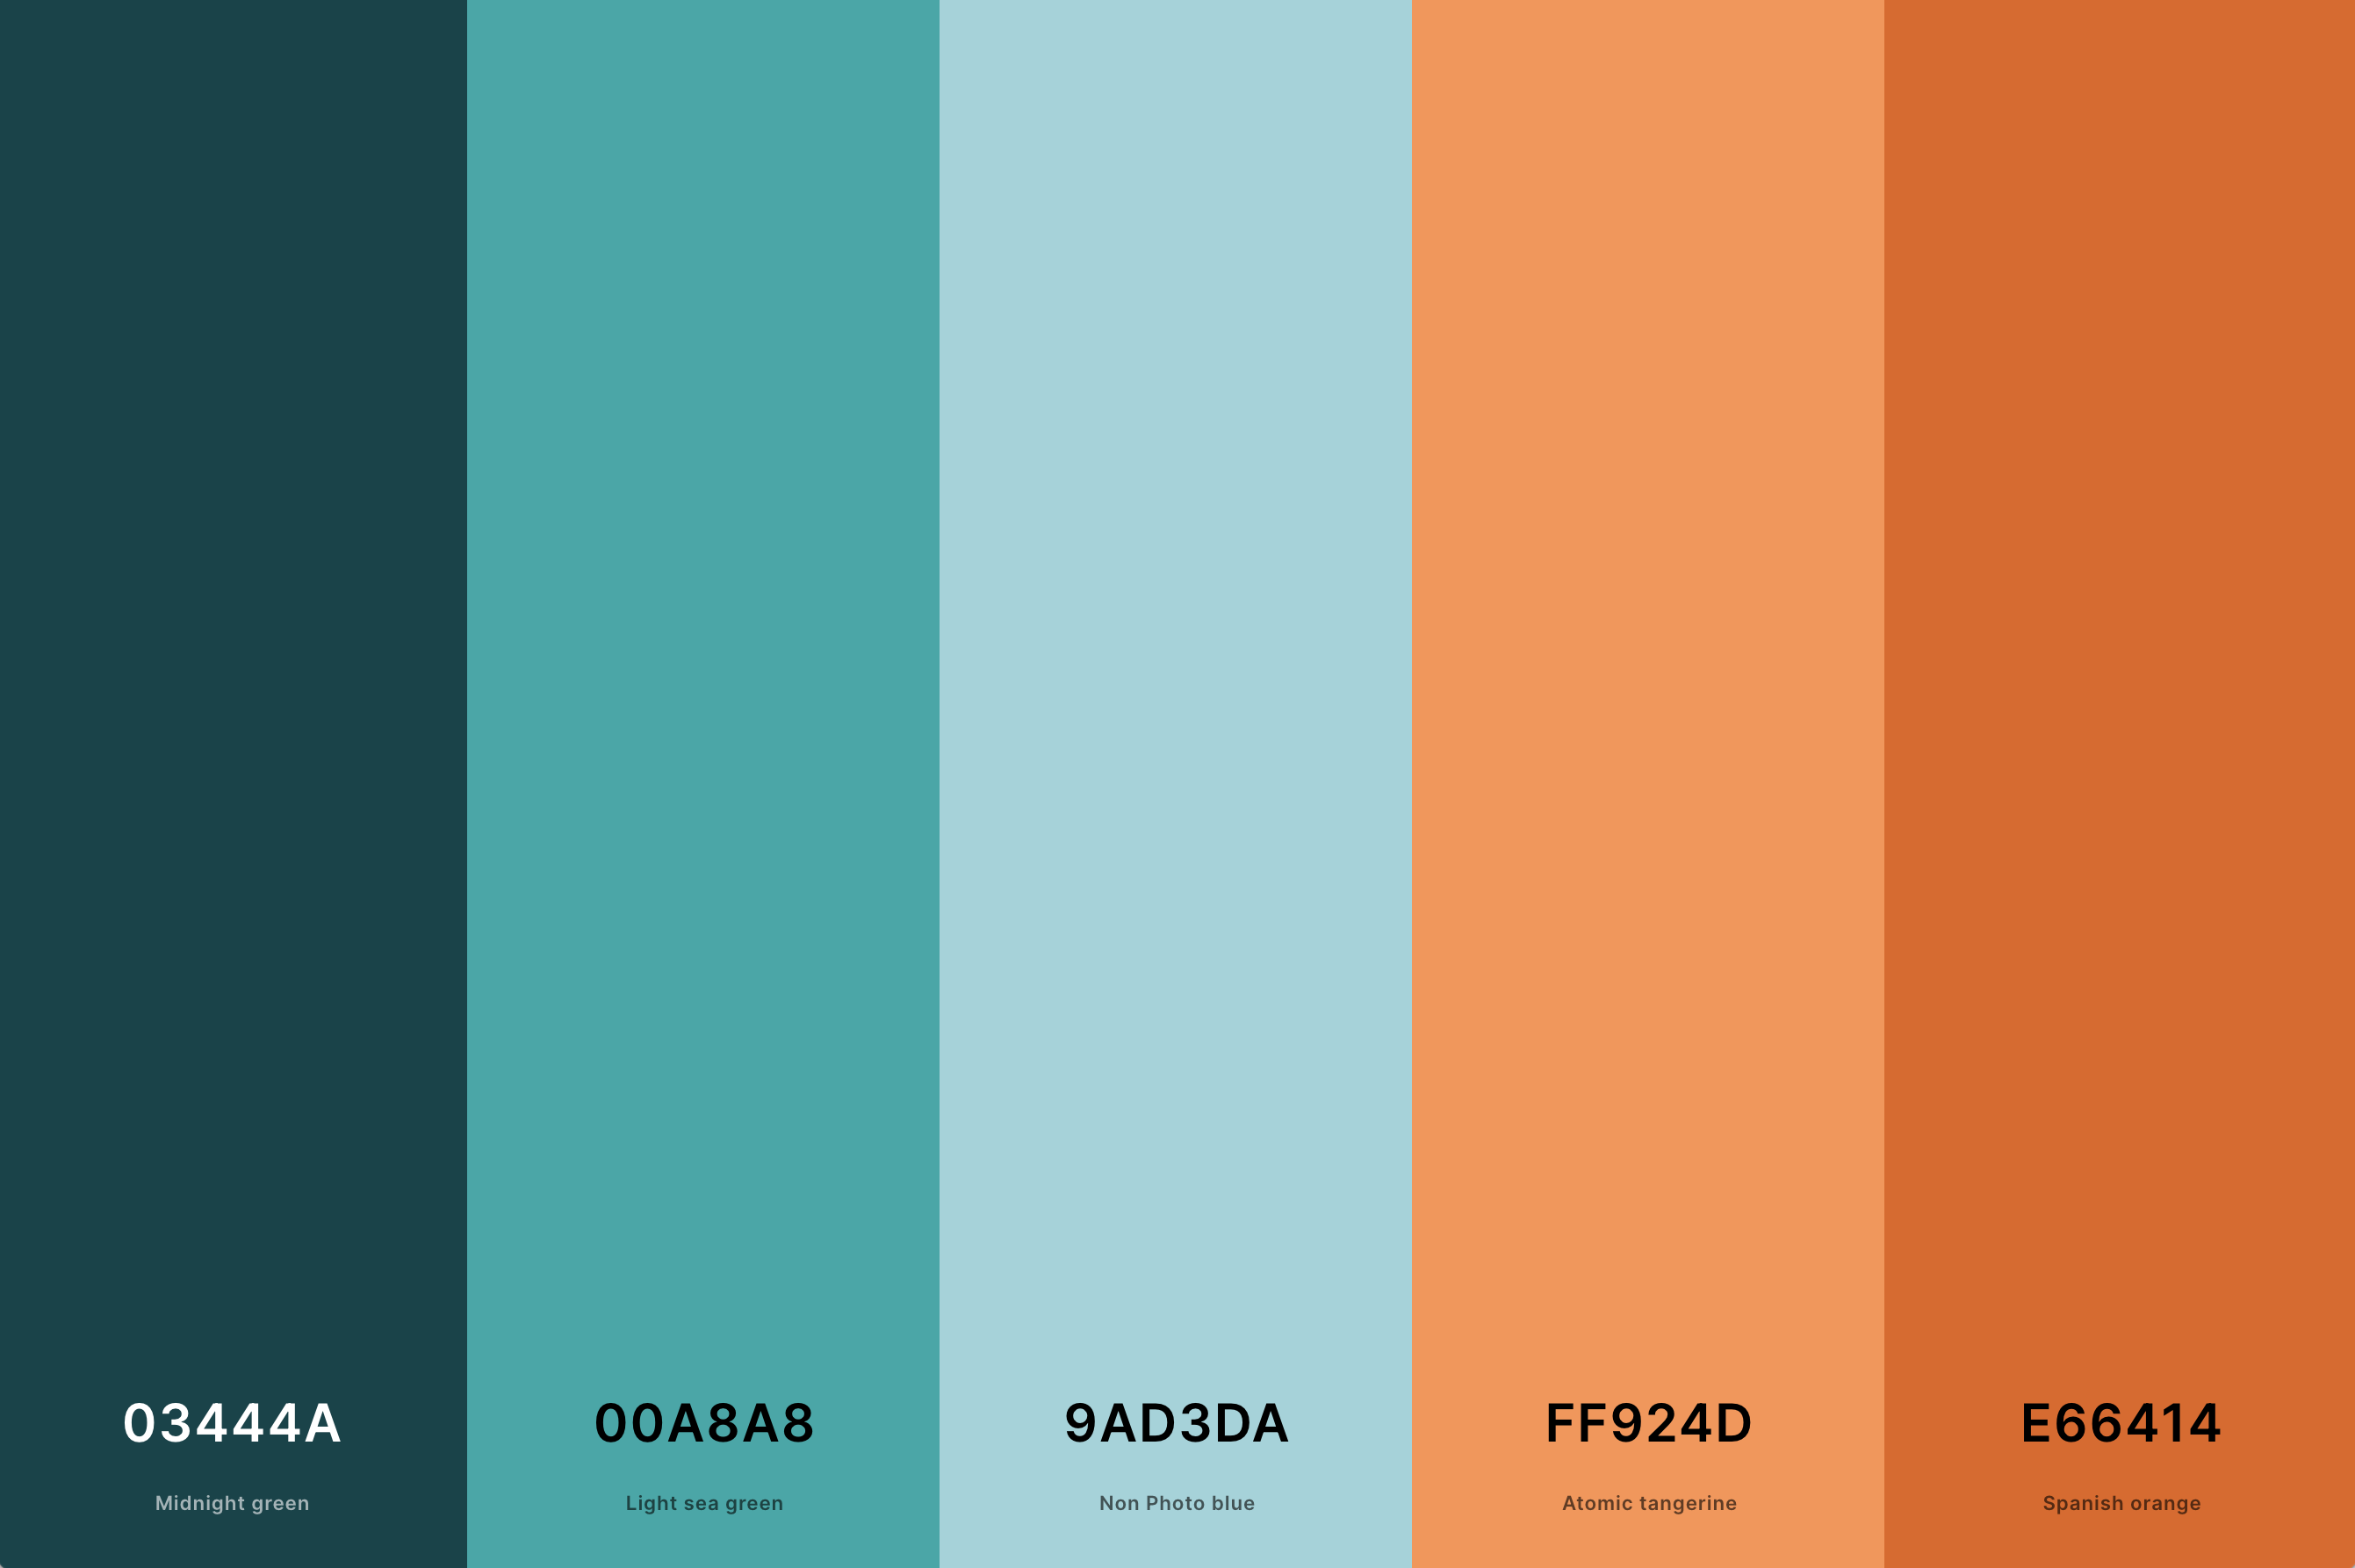 8. Orange And Teal Color Palette Color Palette with Midnight Green (Hex #03444A) + Light Sea Green (Hex #00A8A8) + Non Photo Blue (Hex #9AD3DA) + Atomic Tangerine (Hex #FF924D) + Spanish Orange (Hex #E66414) Color Palette with Hex Codes